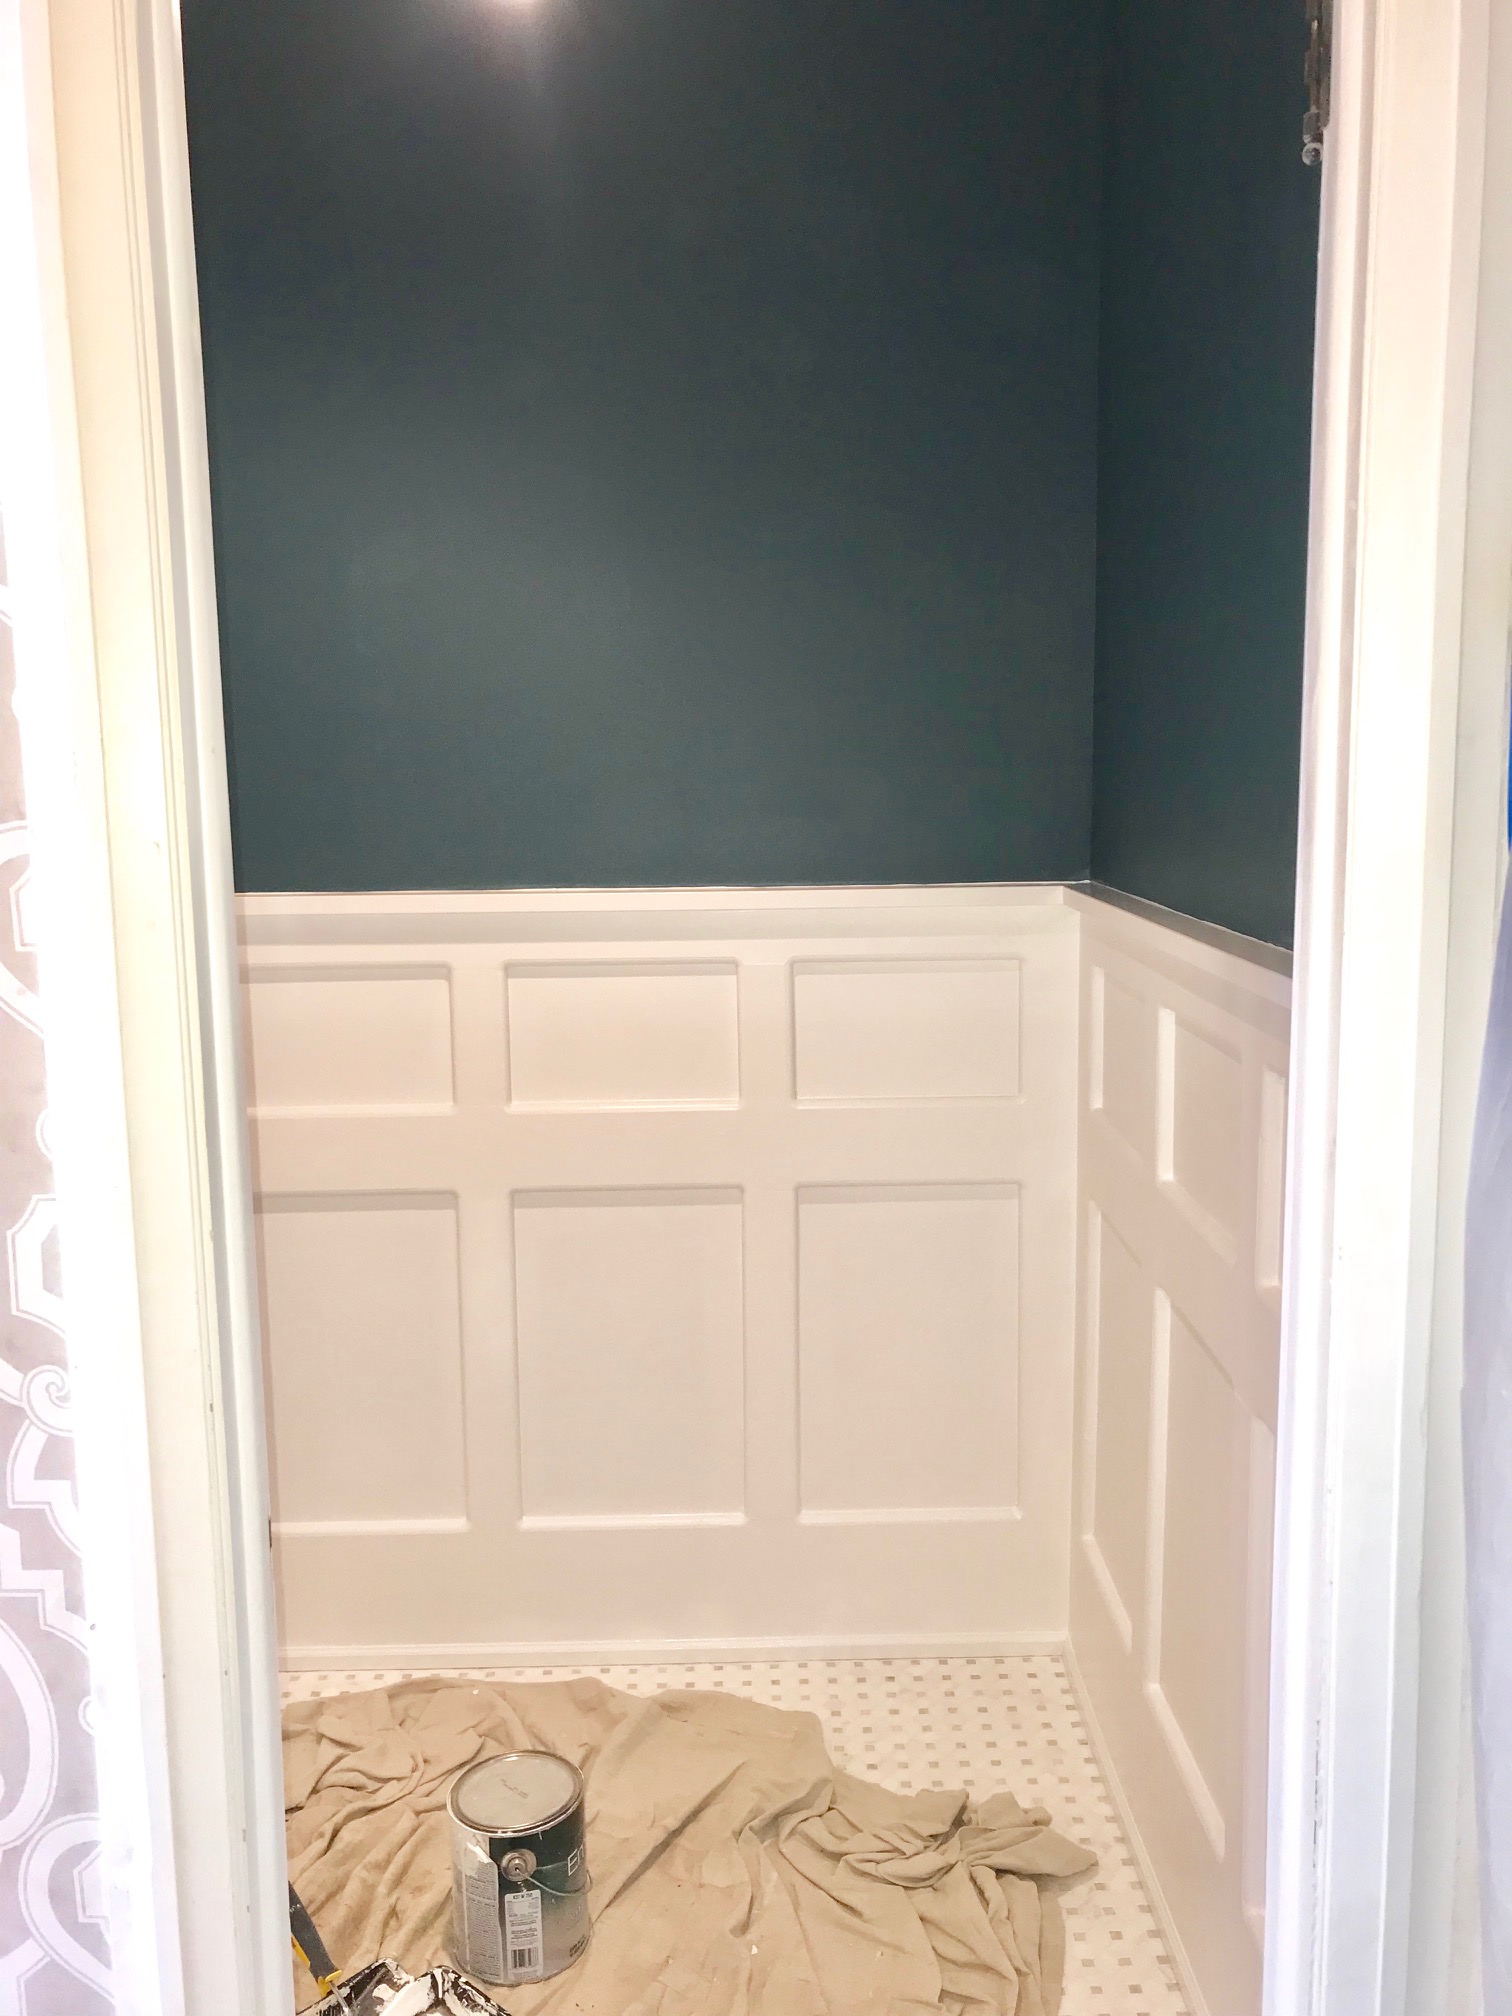 Bathroom makeover wainscot design by Lori Fischer of rethink home interiors